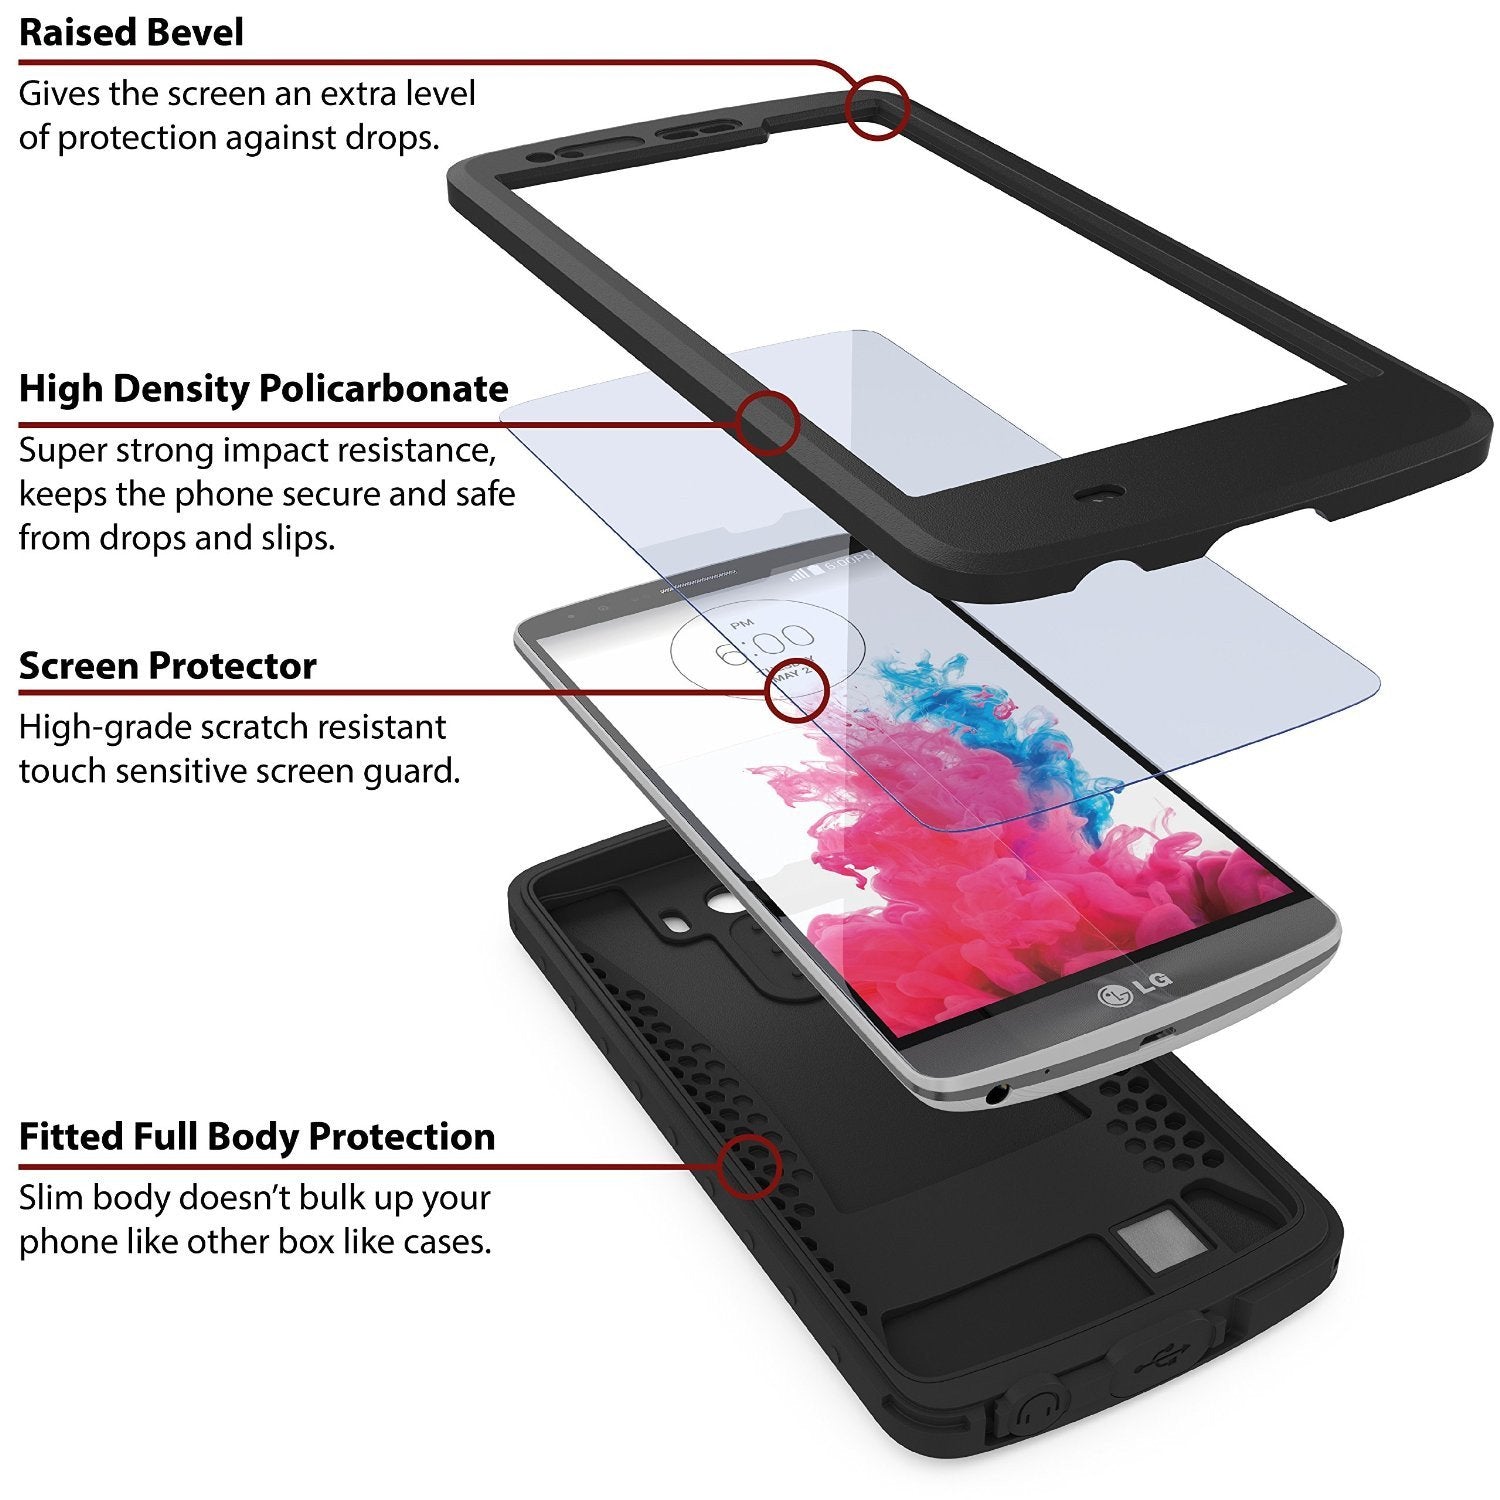 LG G3 Waterproof Case, Ghostek Atomic Black W/ Attached Screen Protector Fitted for LG G3